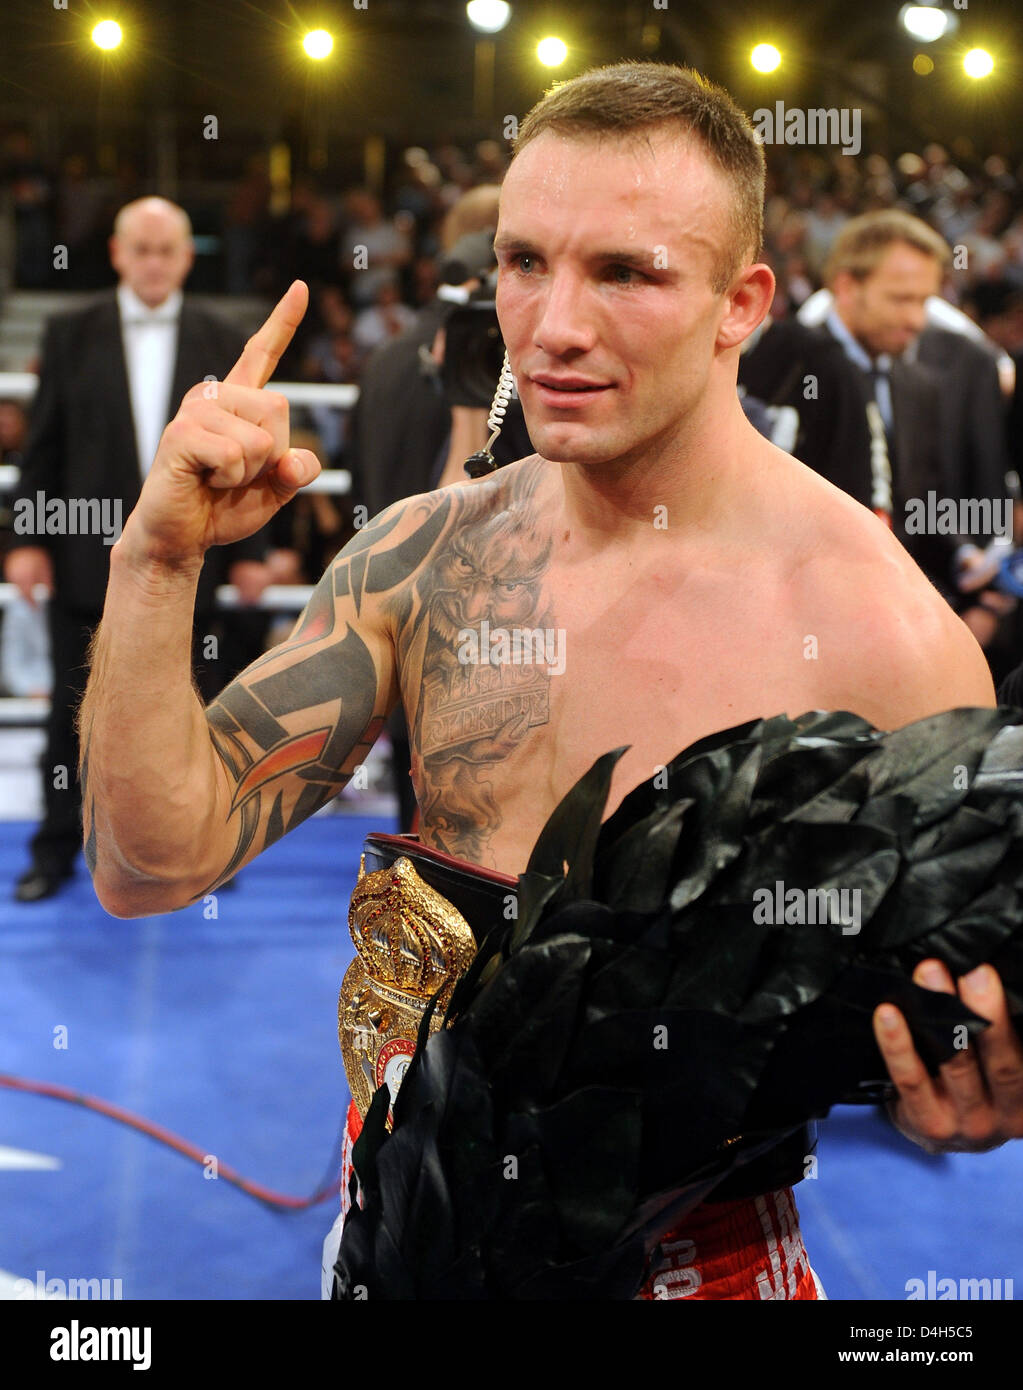 Old and new WBA-Super Middleweight World Champion Mikkel Kessler (Denmark) poses with his crown at Weser-Ems-Halle in Oldenburg, Germany, 25 October 2008. He beat 33 year-old German Danilo Haeussler from Frankfurt Oder by k.o. in the third round. Photo: Ingo Wagner Stock Photo